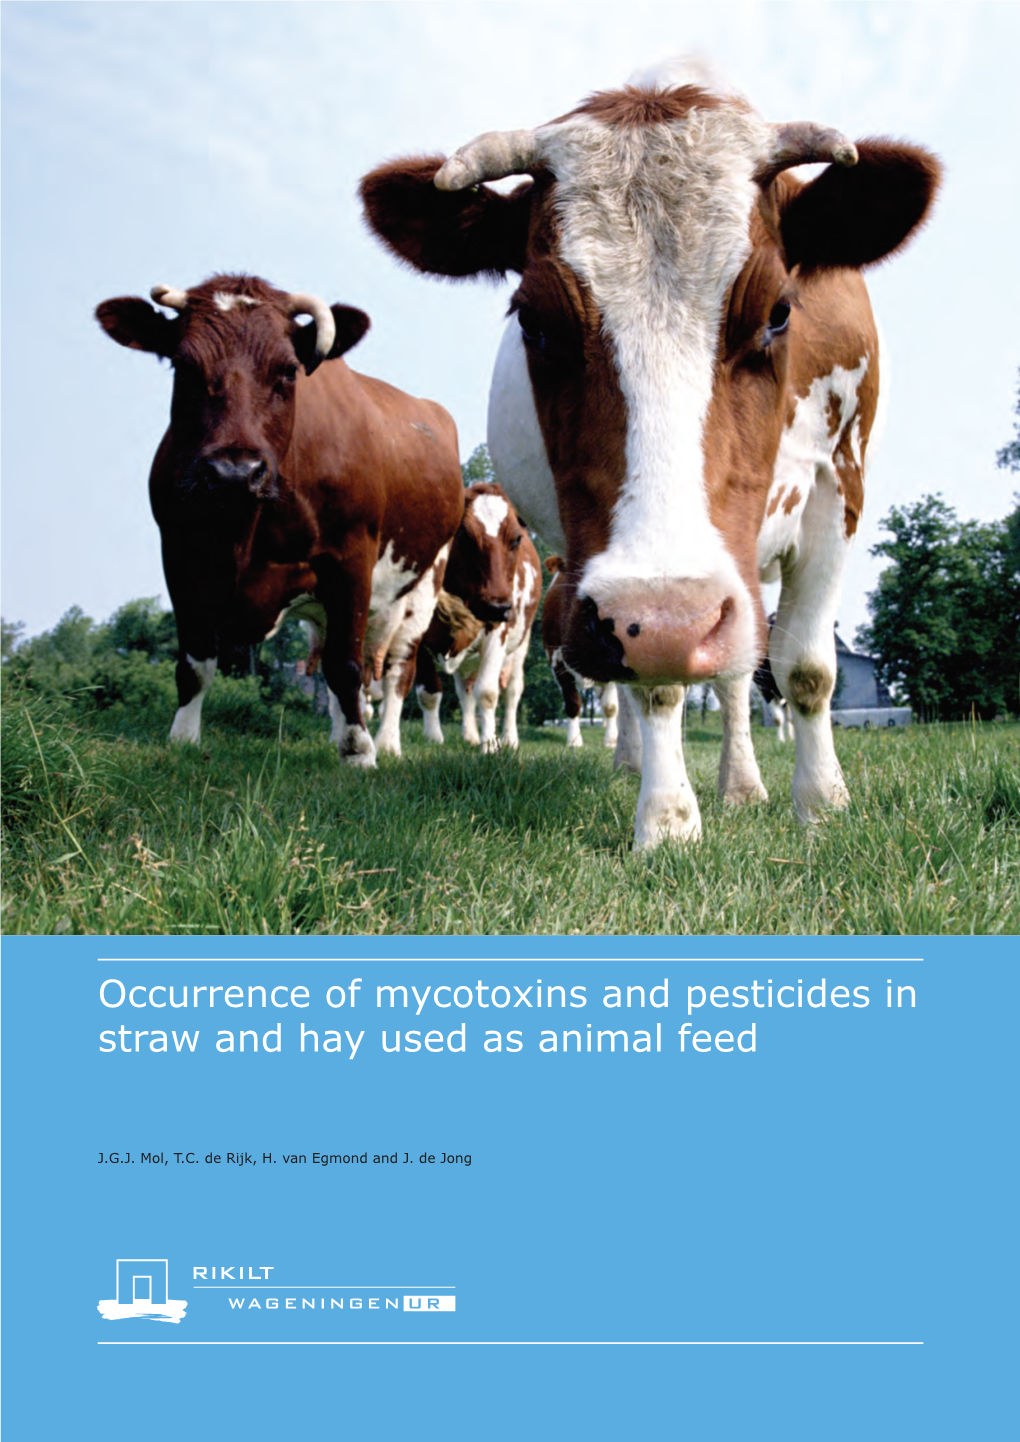 Occurrence of Mycotoxins and Pesticides in Straw and Hay Used As Animal Feed